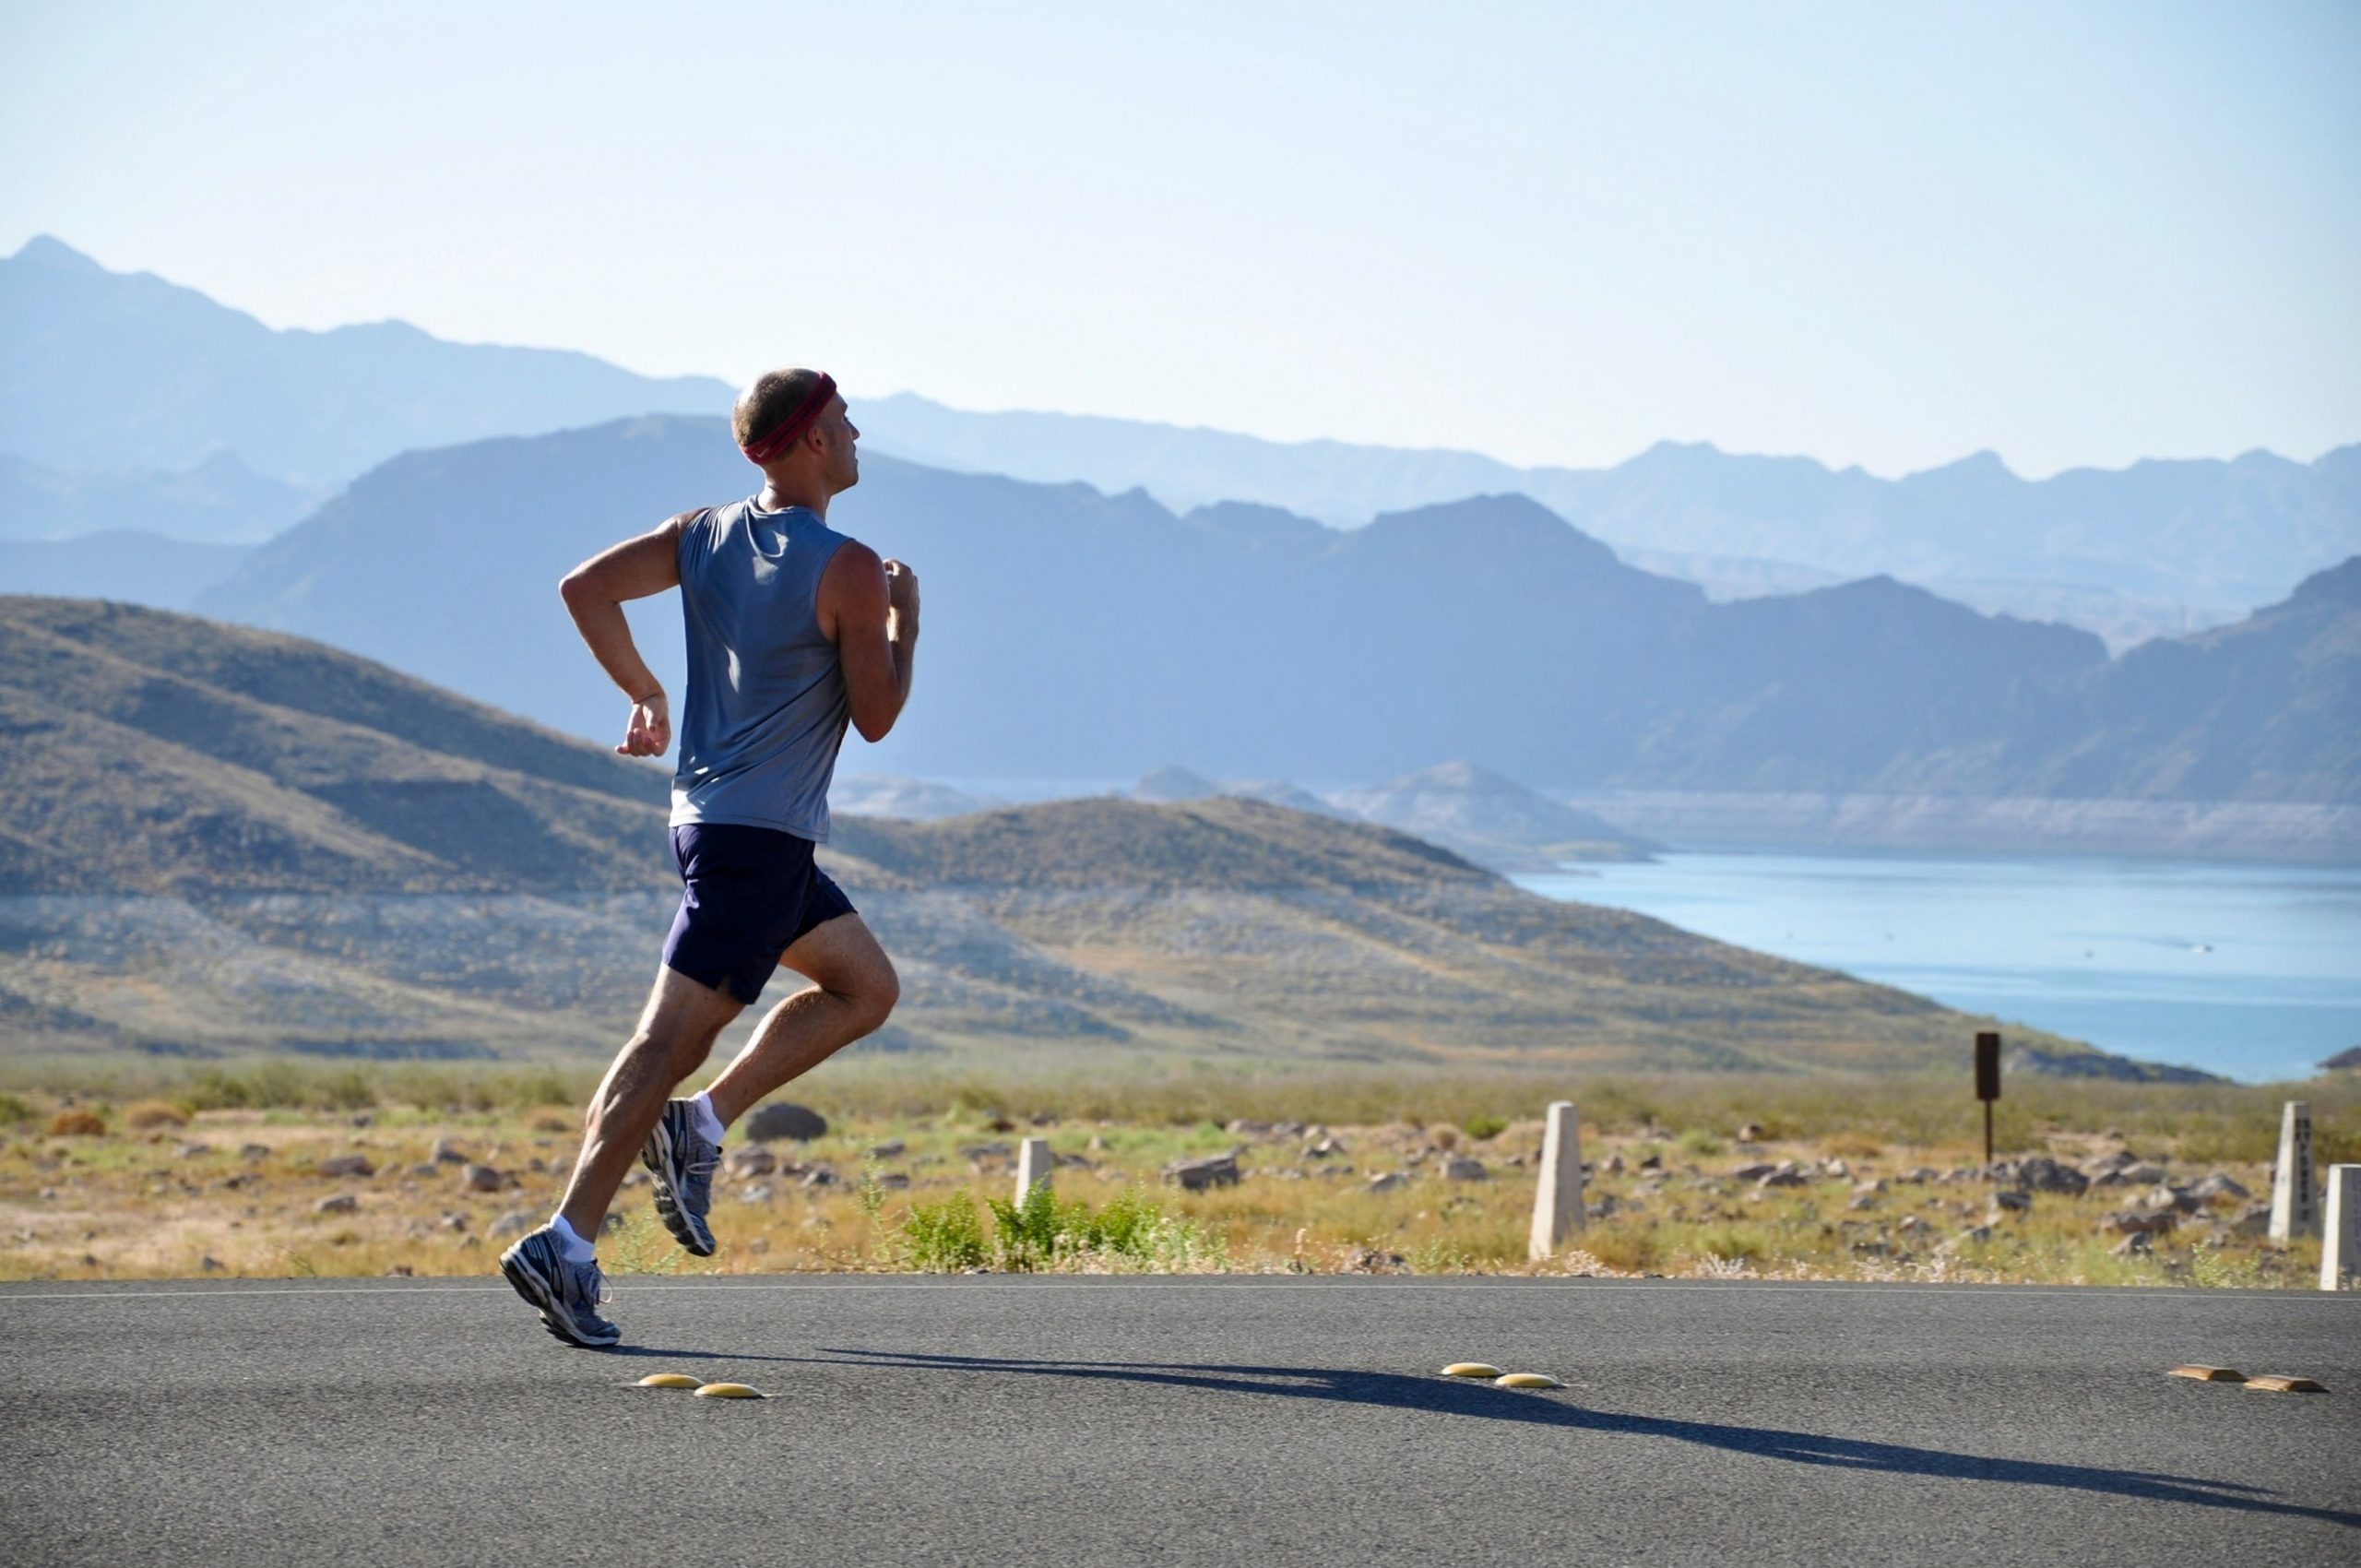 Treadmills vs Running Outdoors – What’s the Difference?